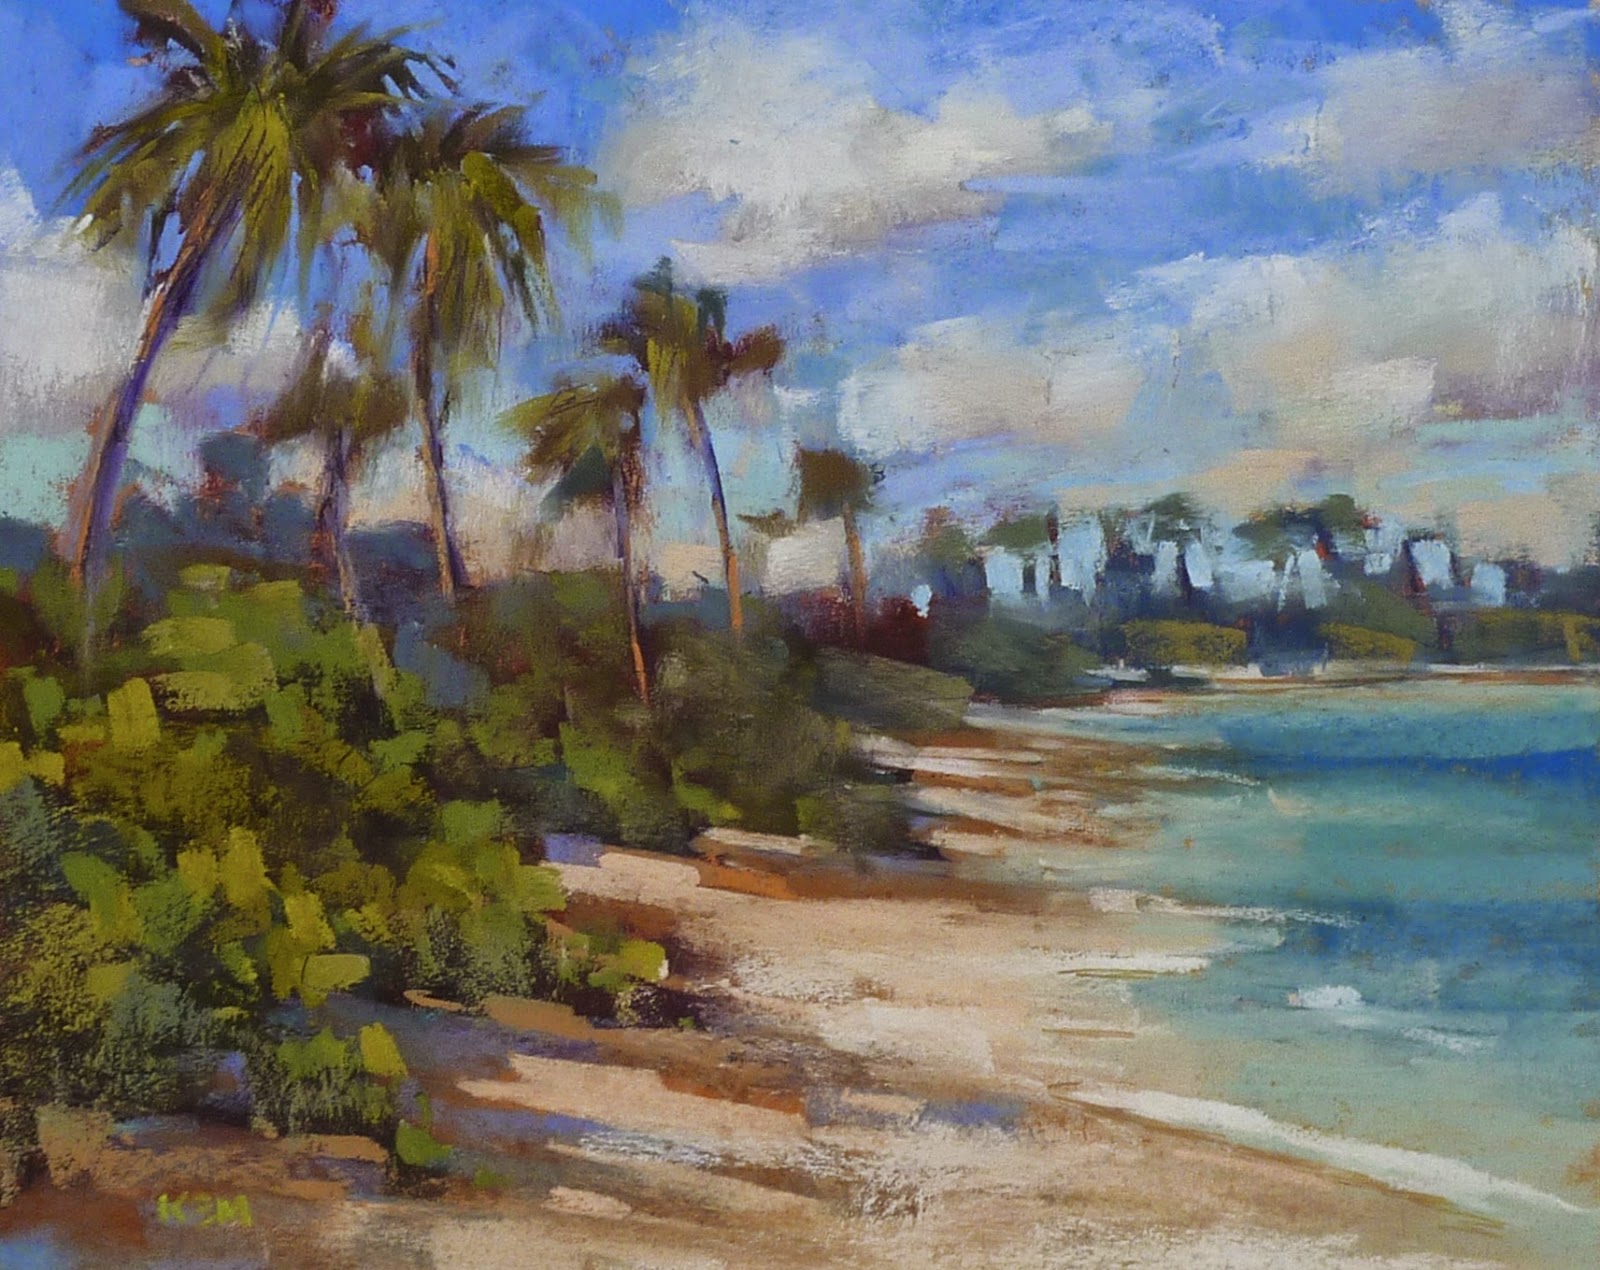 Painting My World: How to Paint the Beach...New Pastel ...